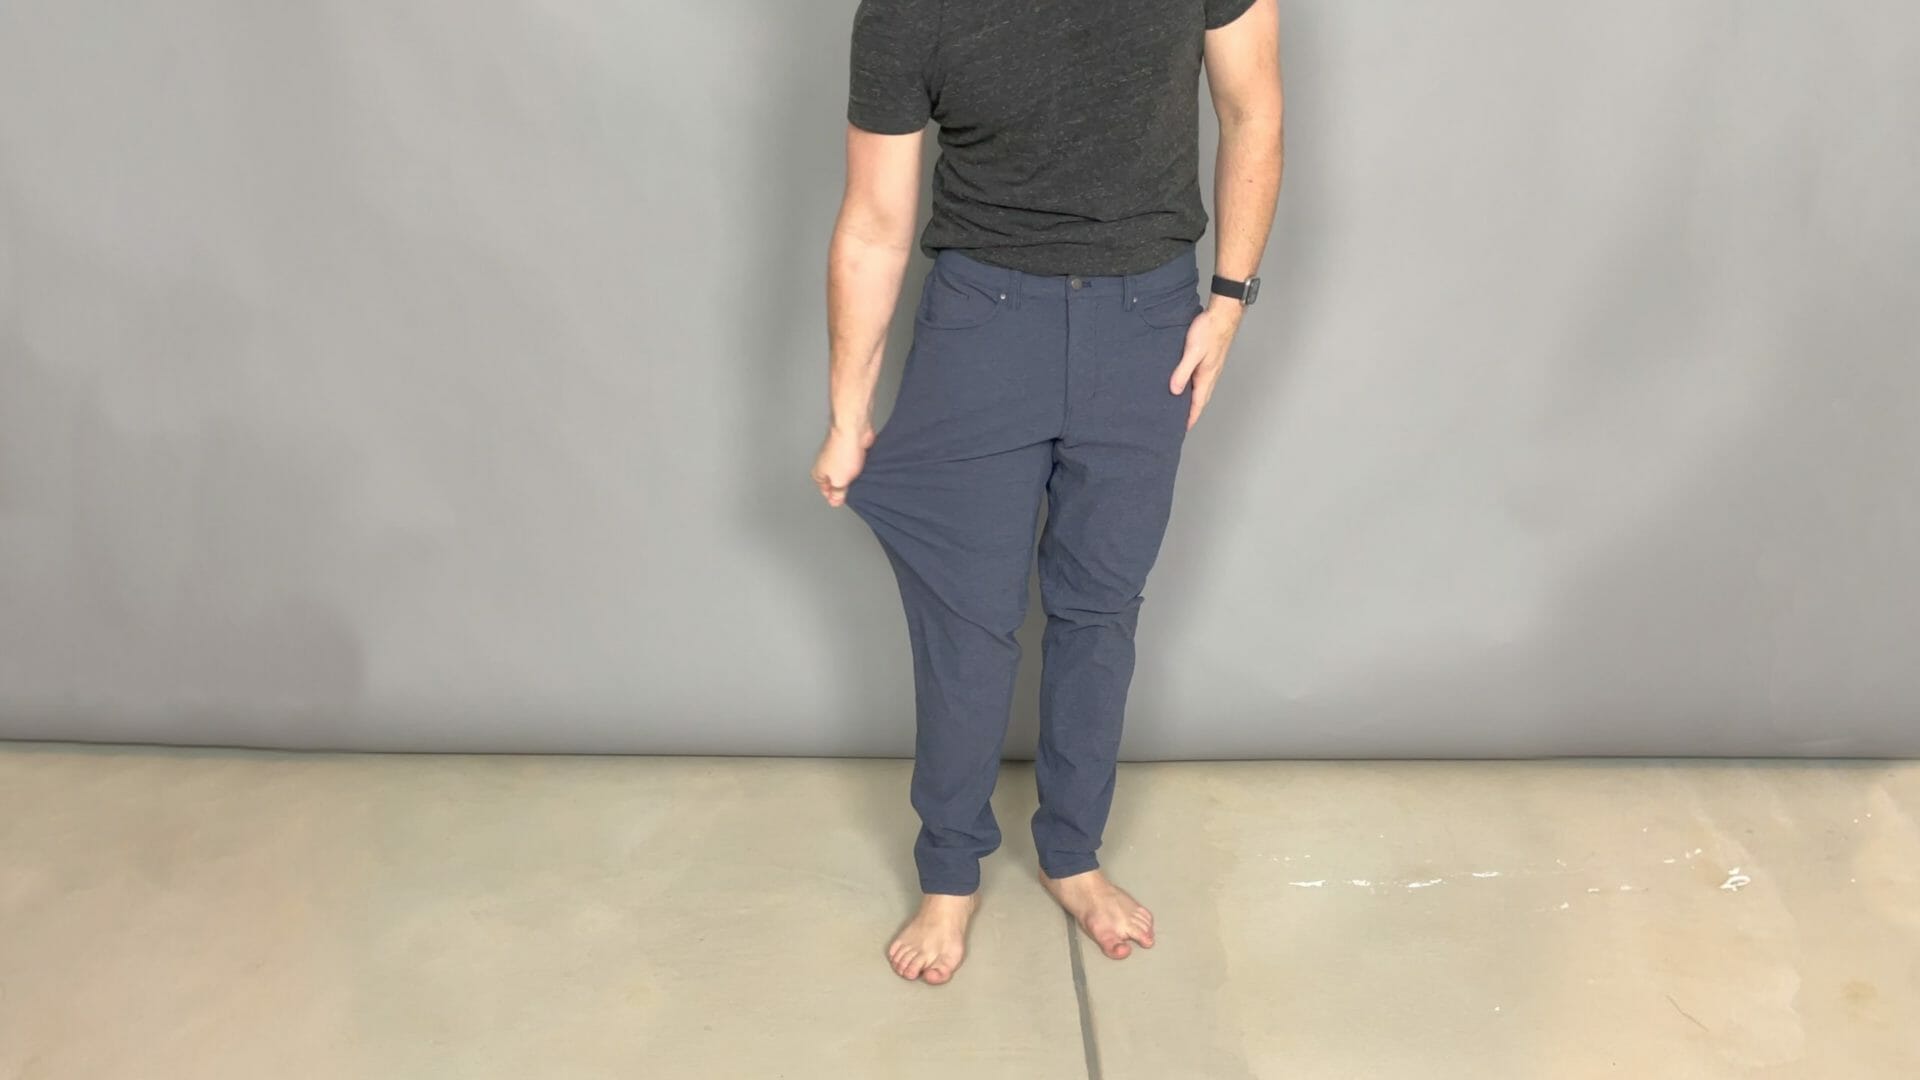 Lululemon "Jeans" are Here: Lululemon Tech Canvas Review 5